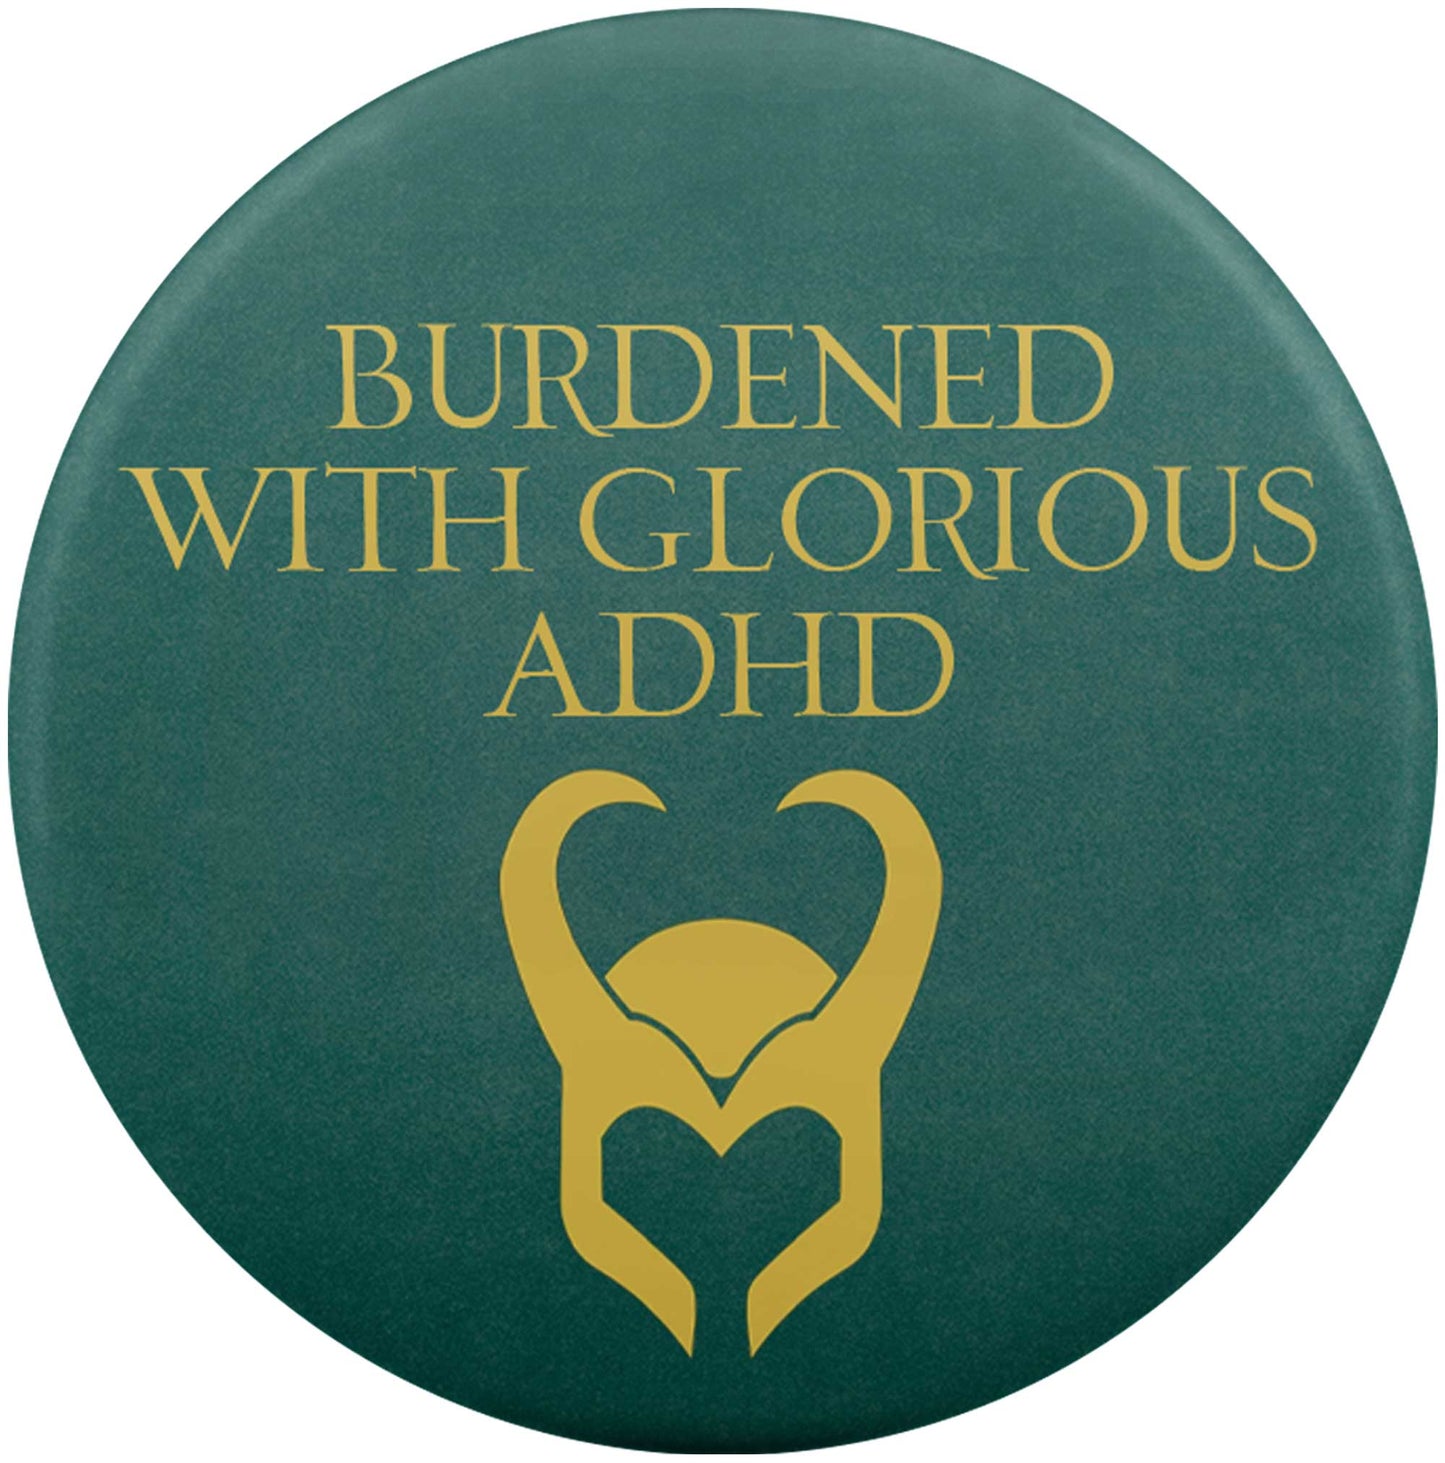 Burdened With Glorious ADHD